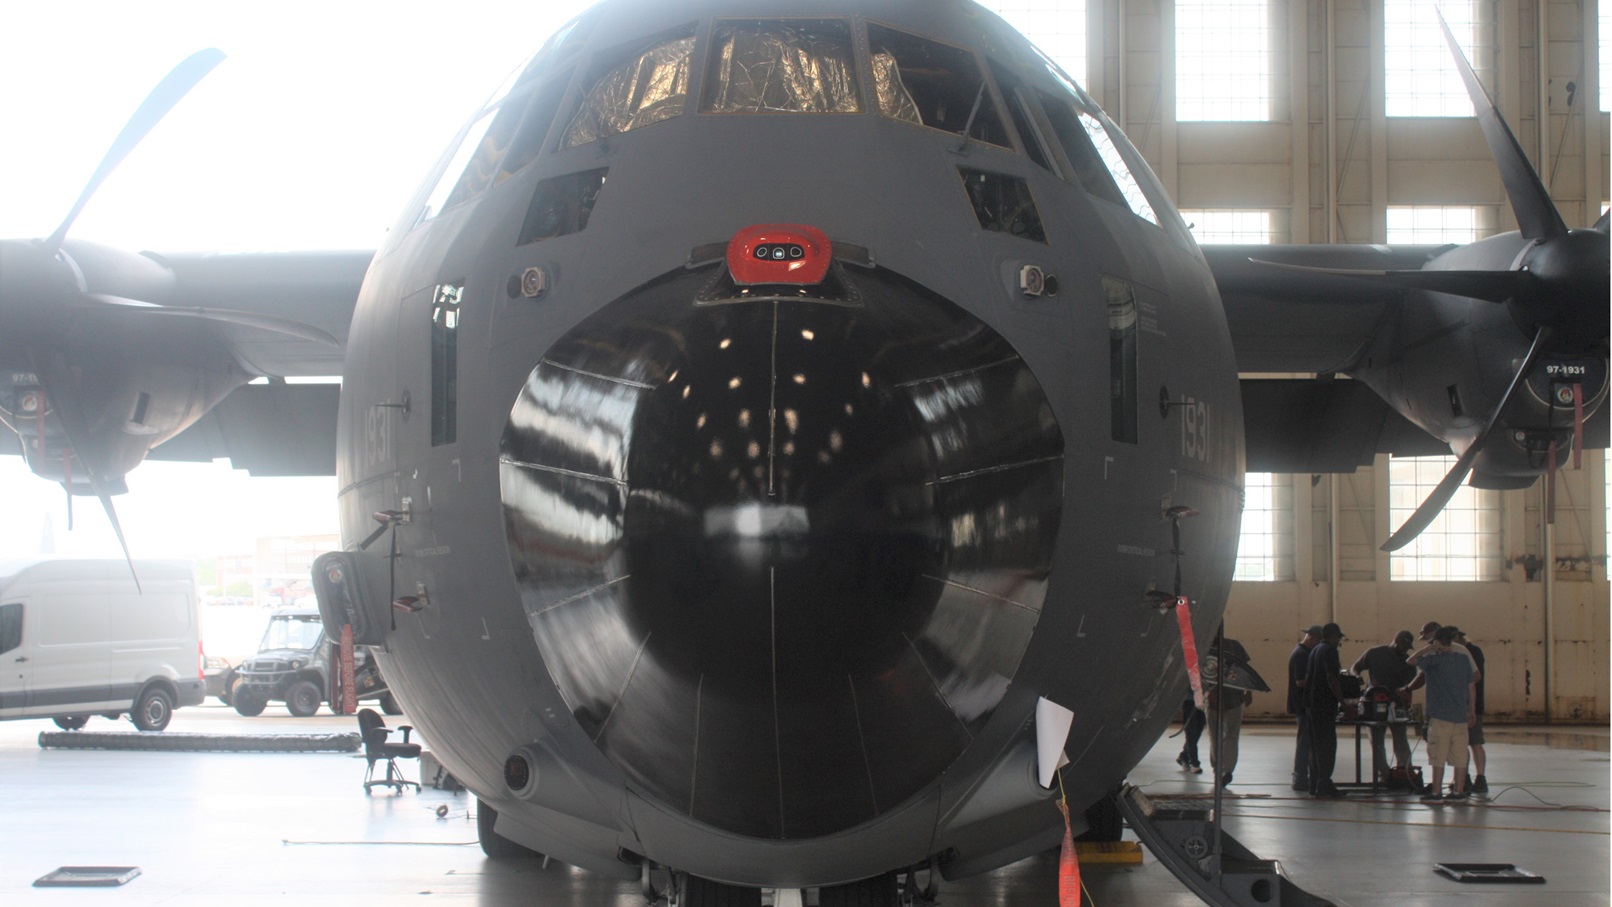 Collins Aerospace Completes Test Flight of Its Enhanced Vision System (EVS) on C130J aircraft